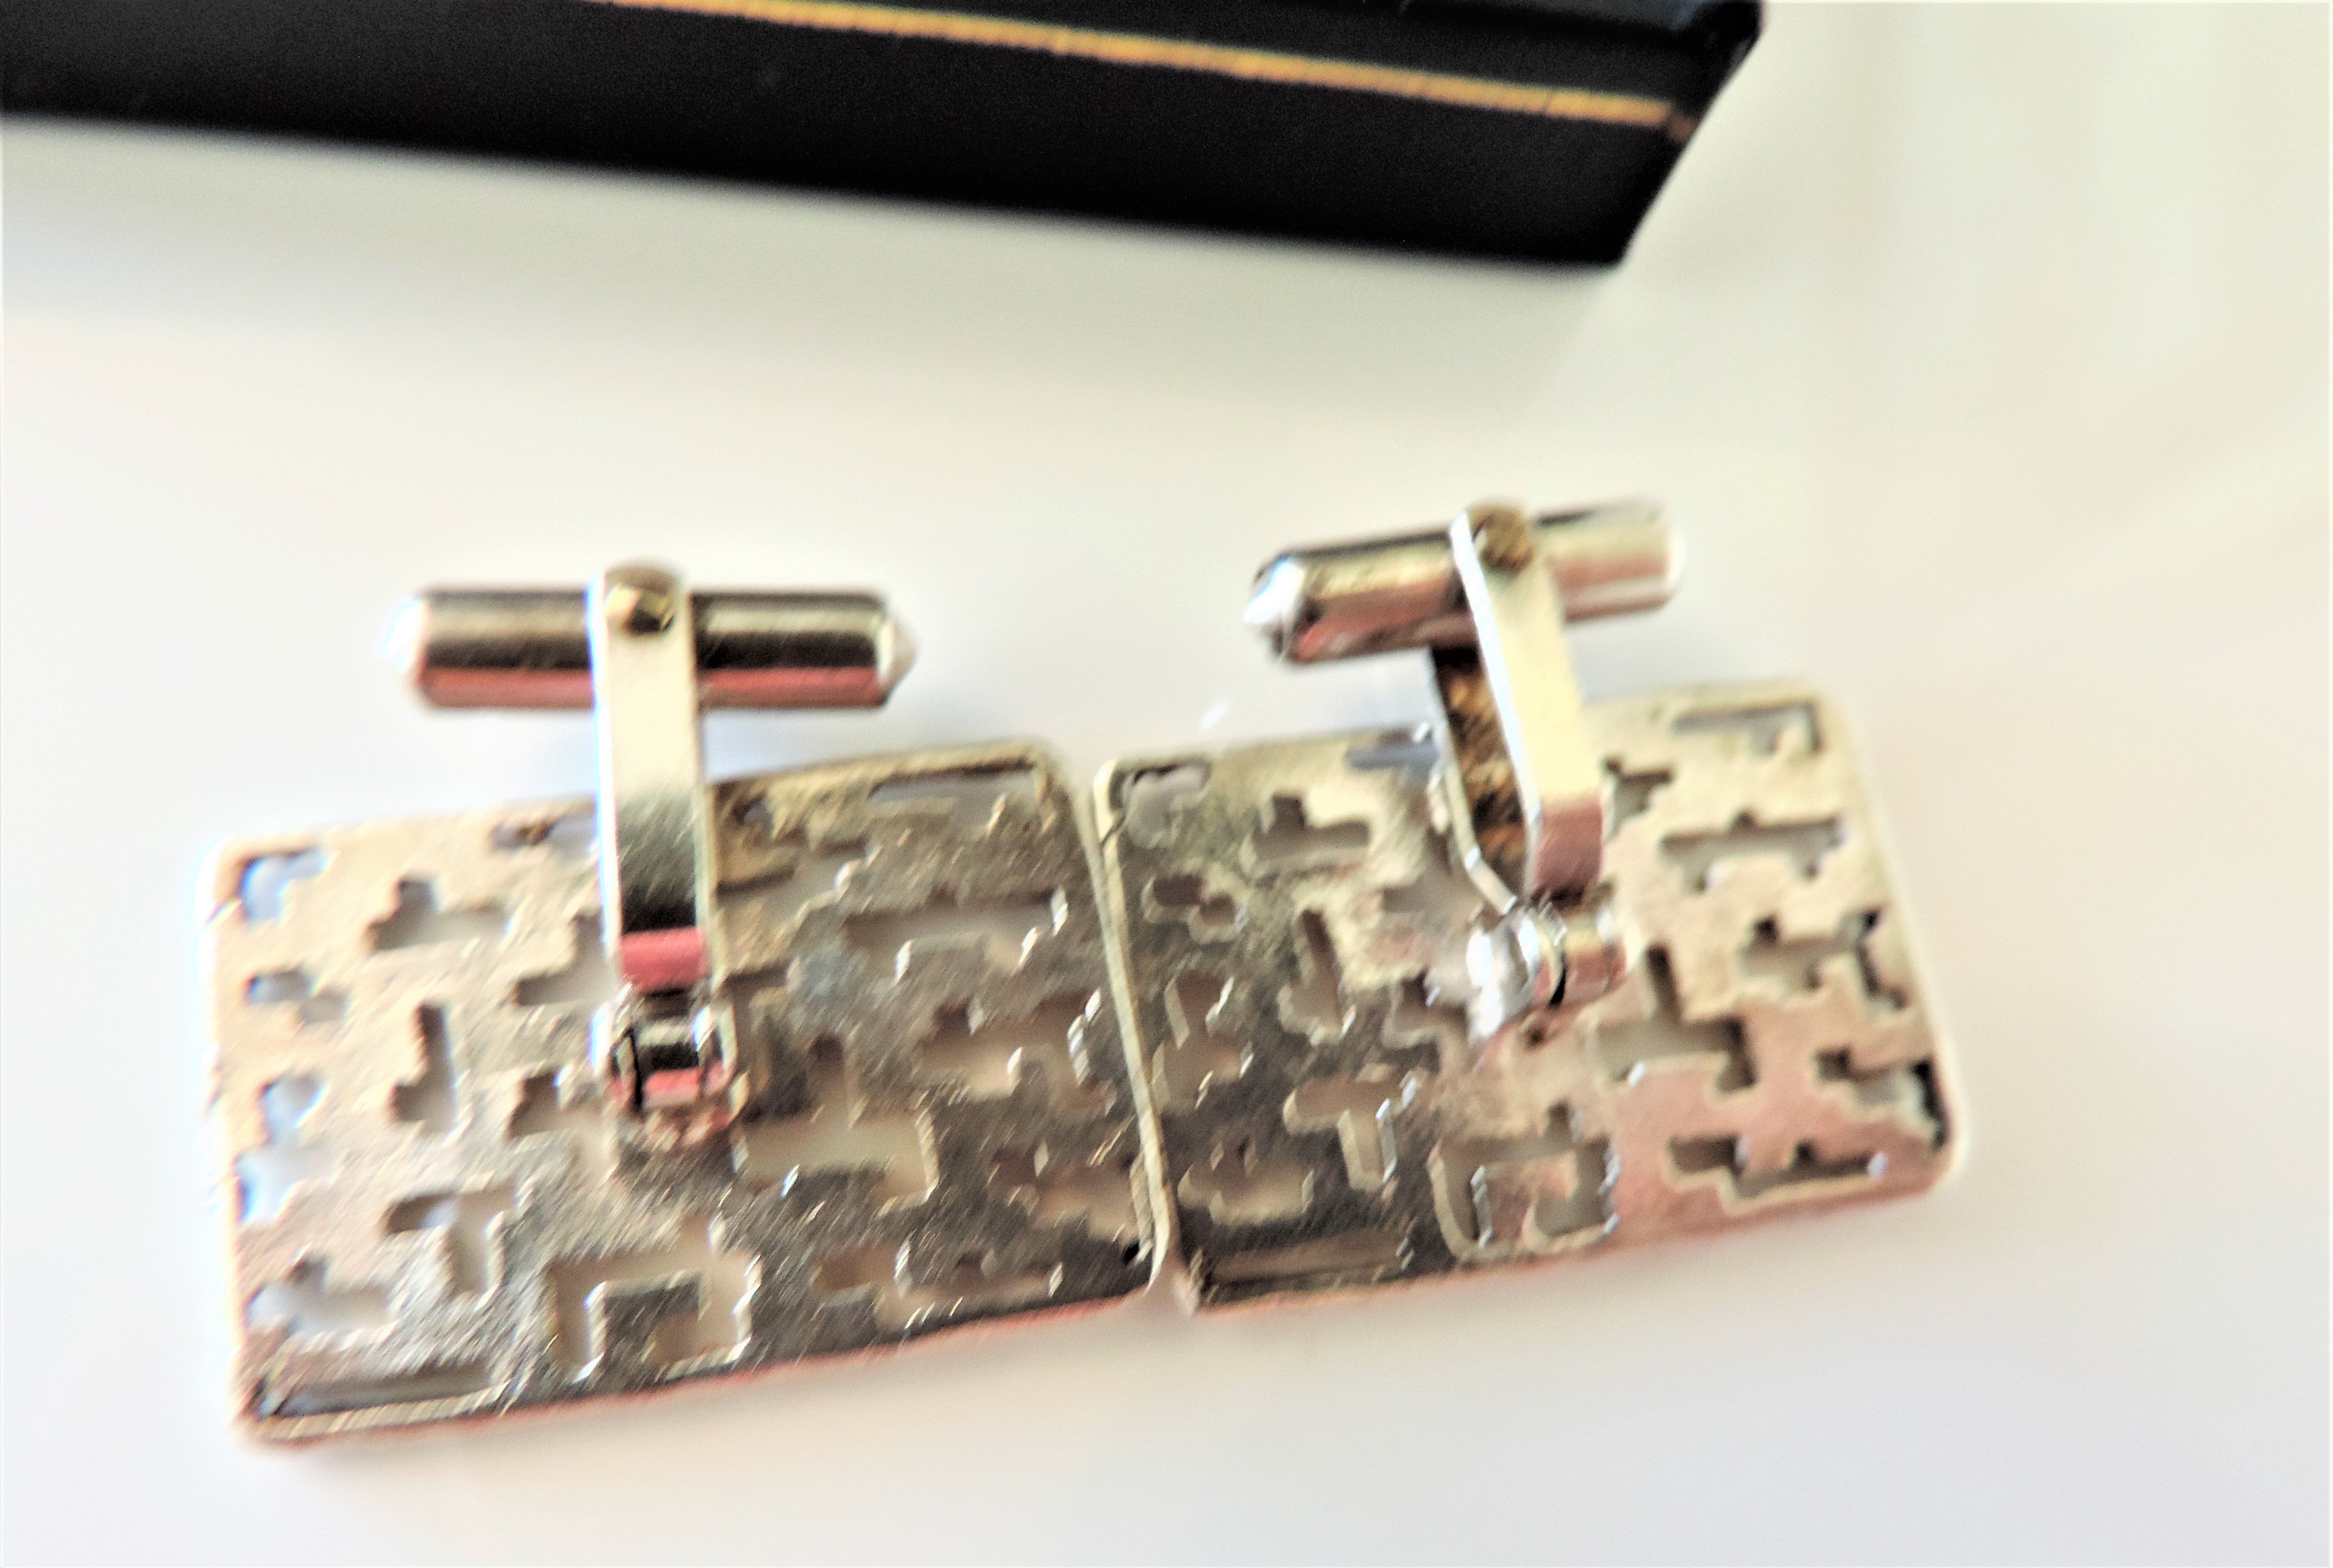 Vintage Sterling Silver Gents Cufflinks with Gift Box - Image 3 of 3